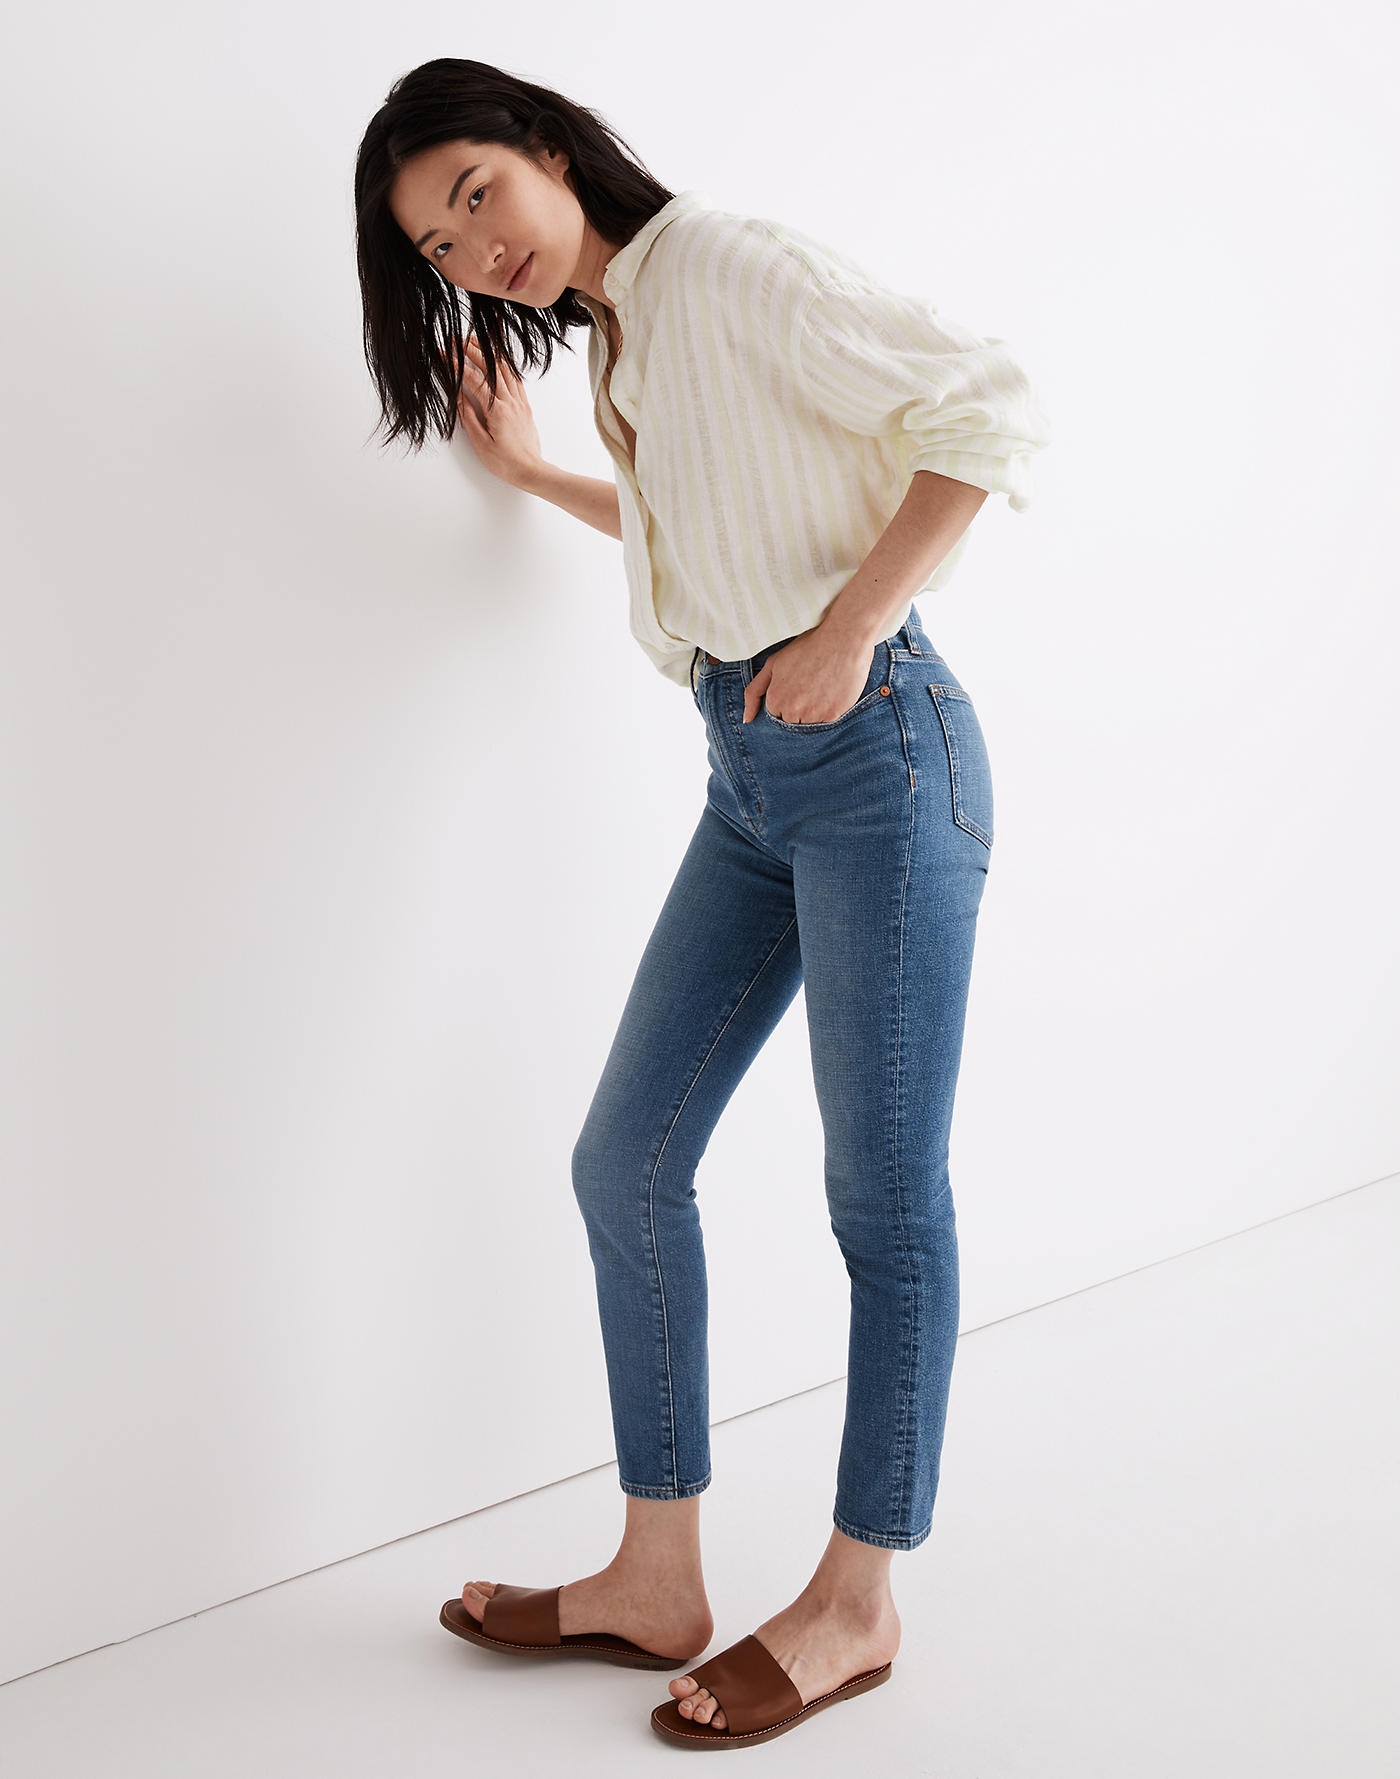 Madewell The Perfect Vintage Crop Jean in Sandford Wash: Summerweight Edition